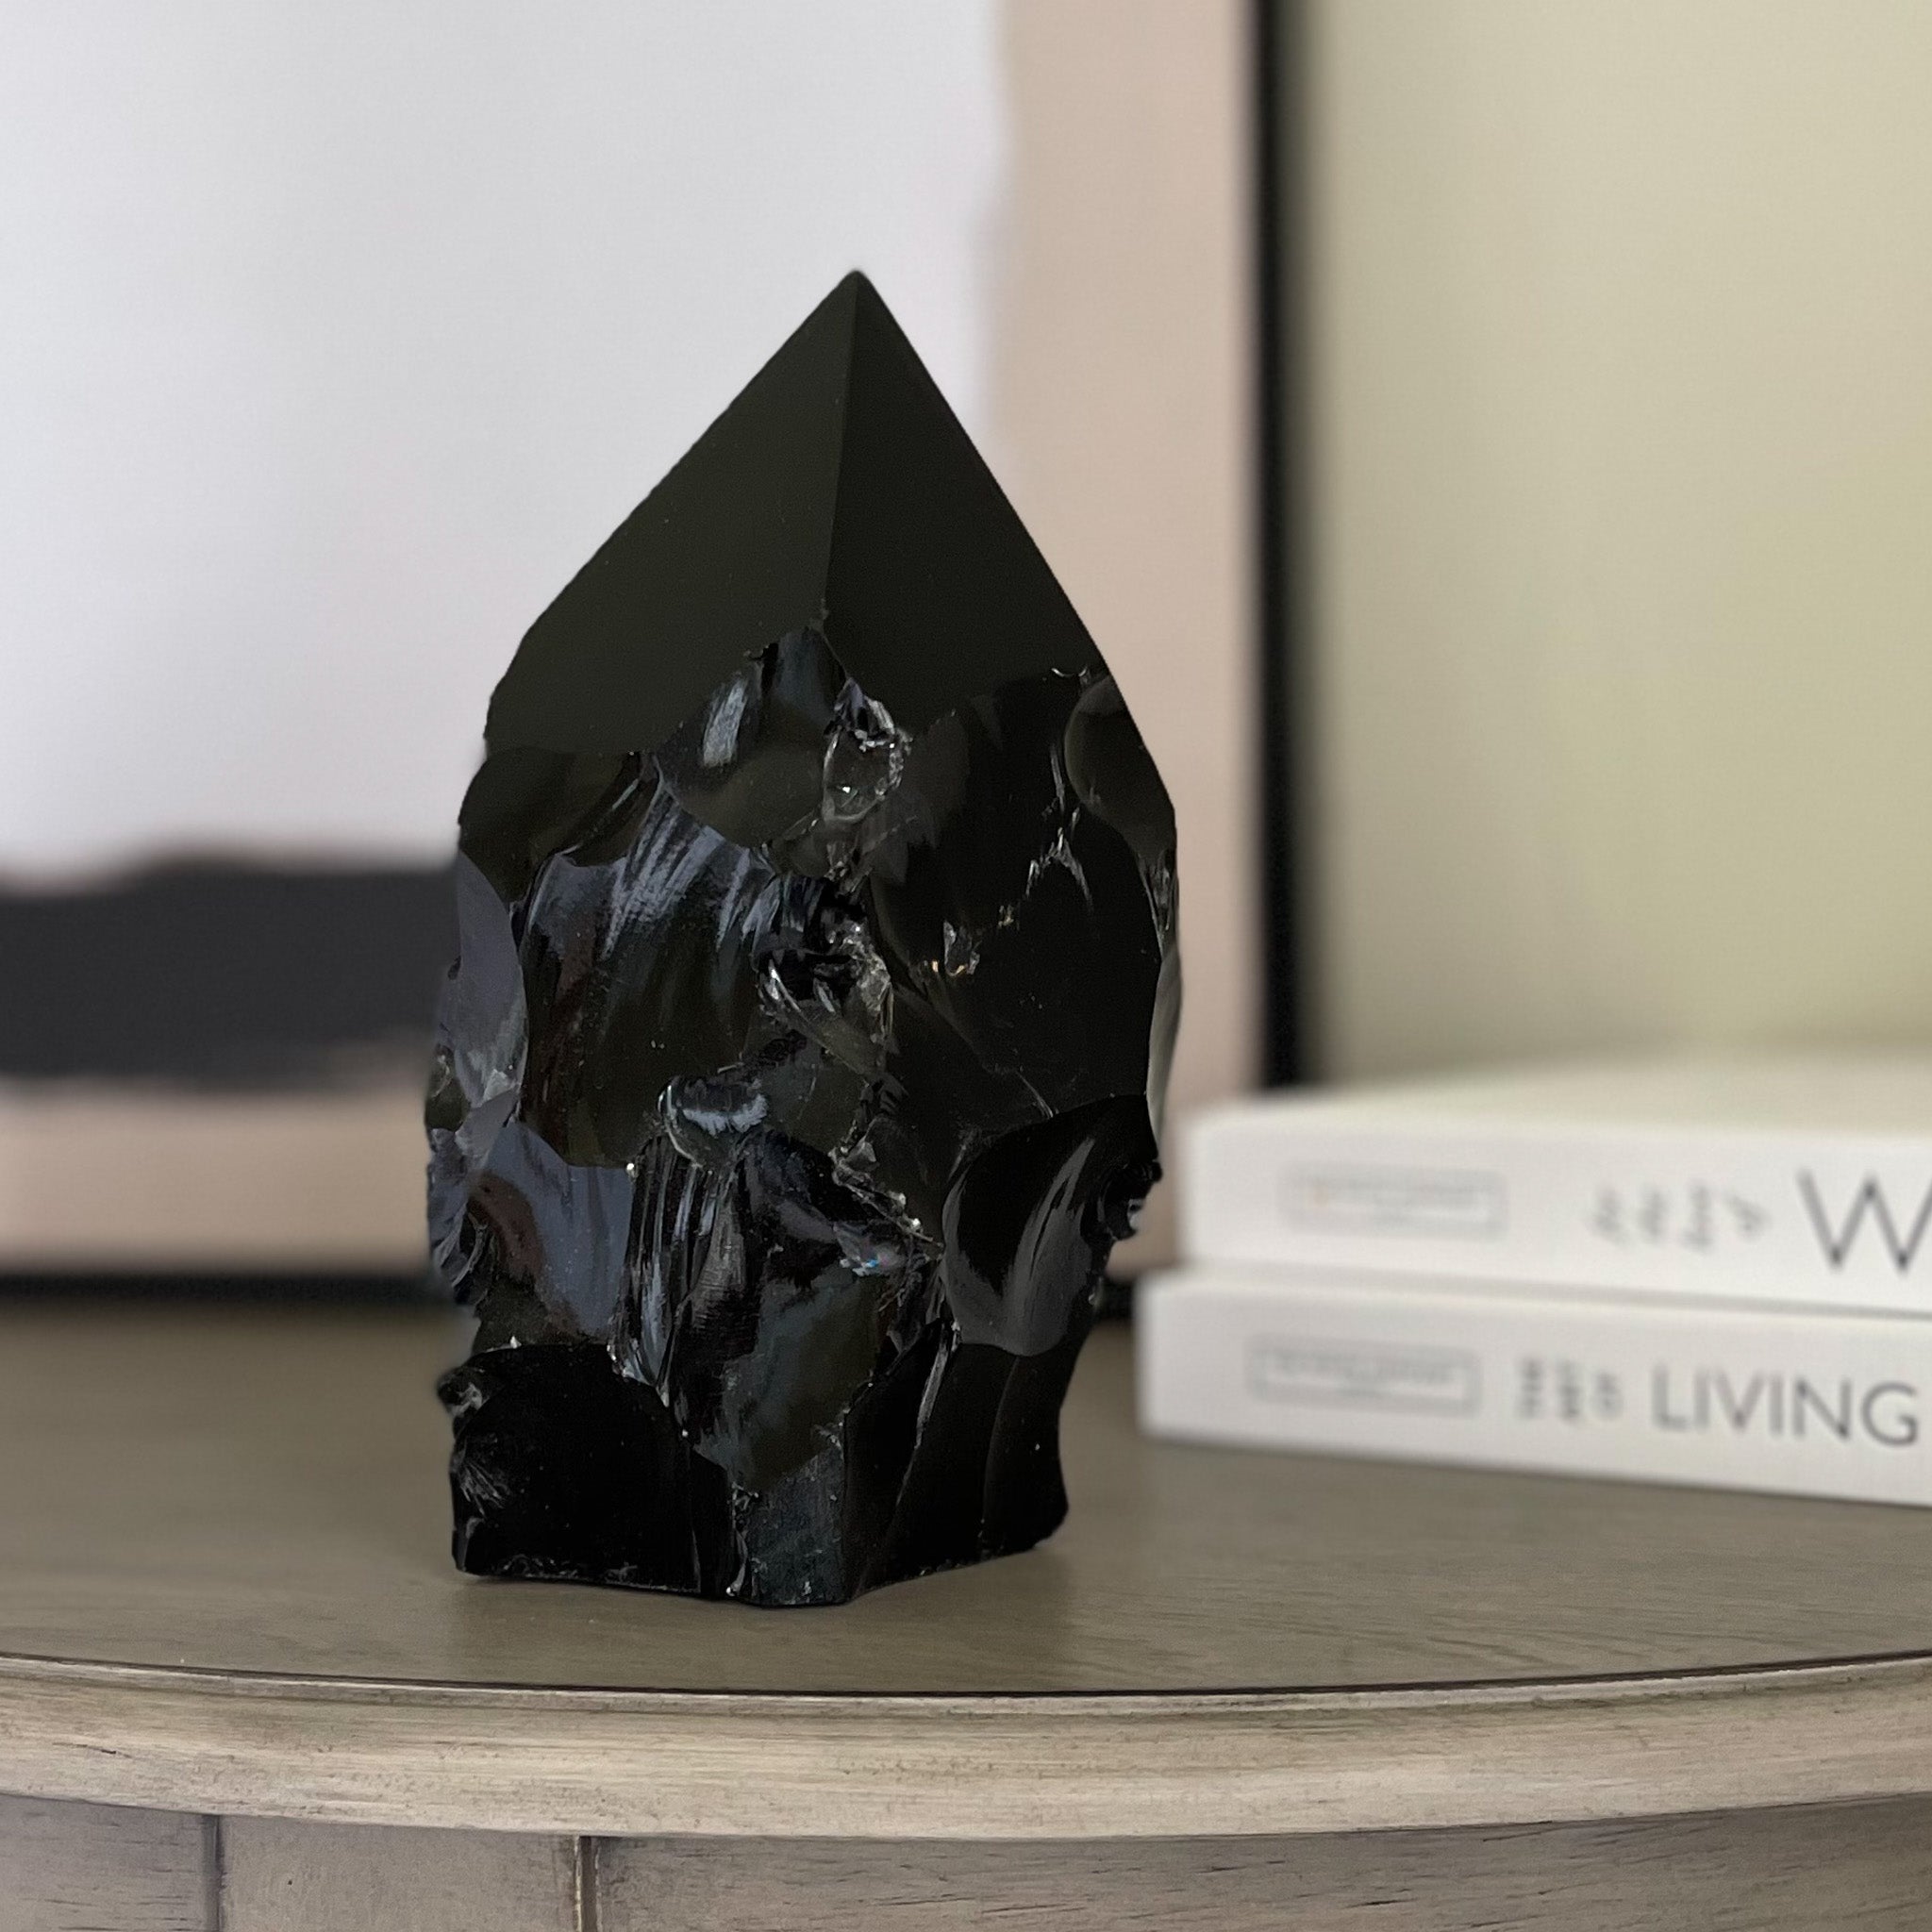 volcanic glass, rustic obsidian point